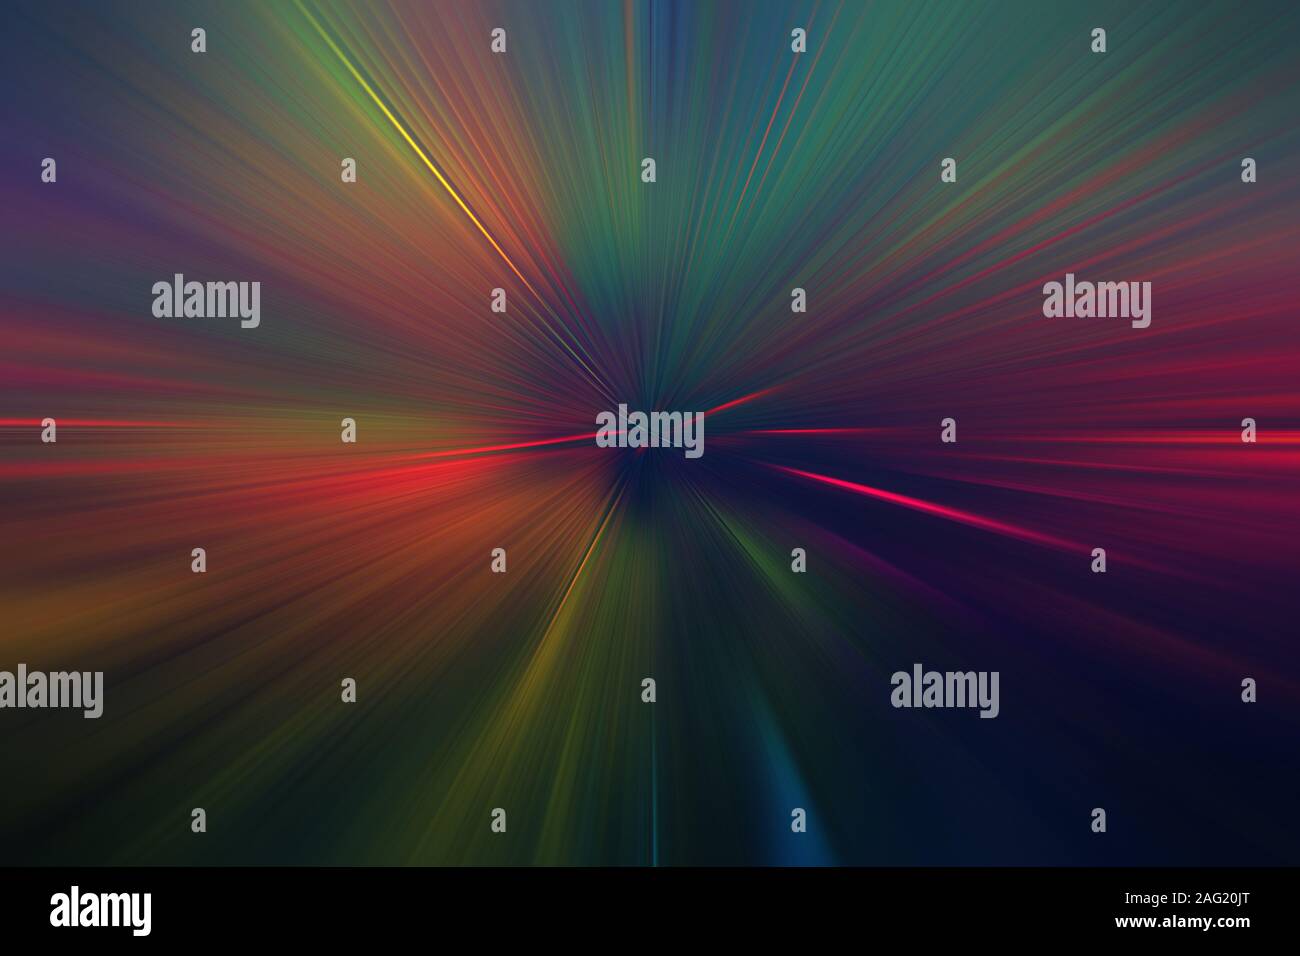 A colorful abstract motion blur background image. Stock Photo